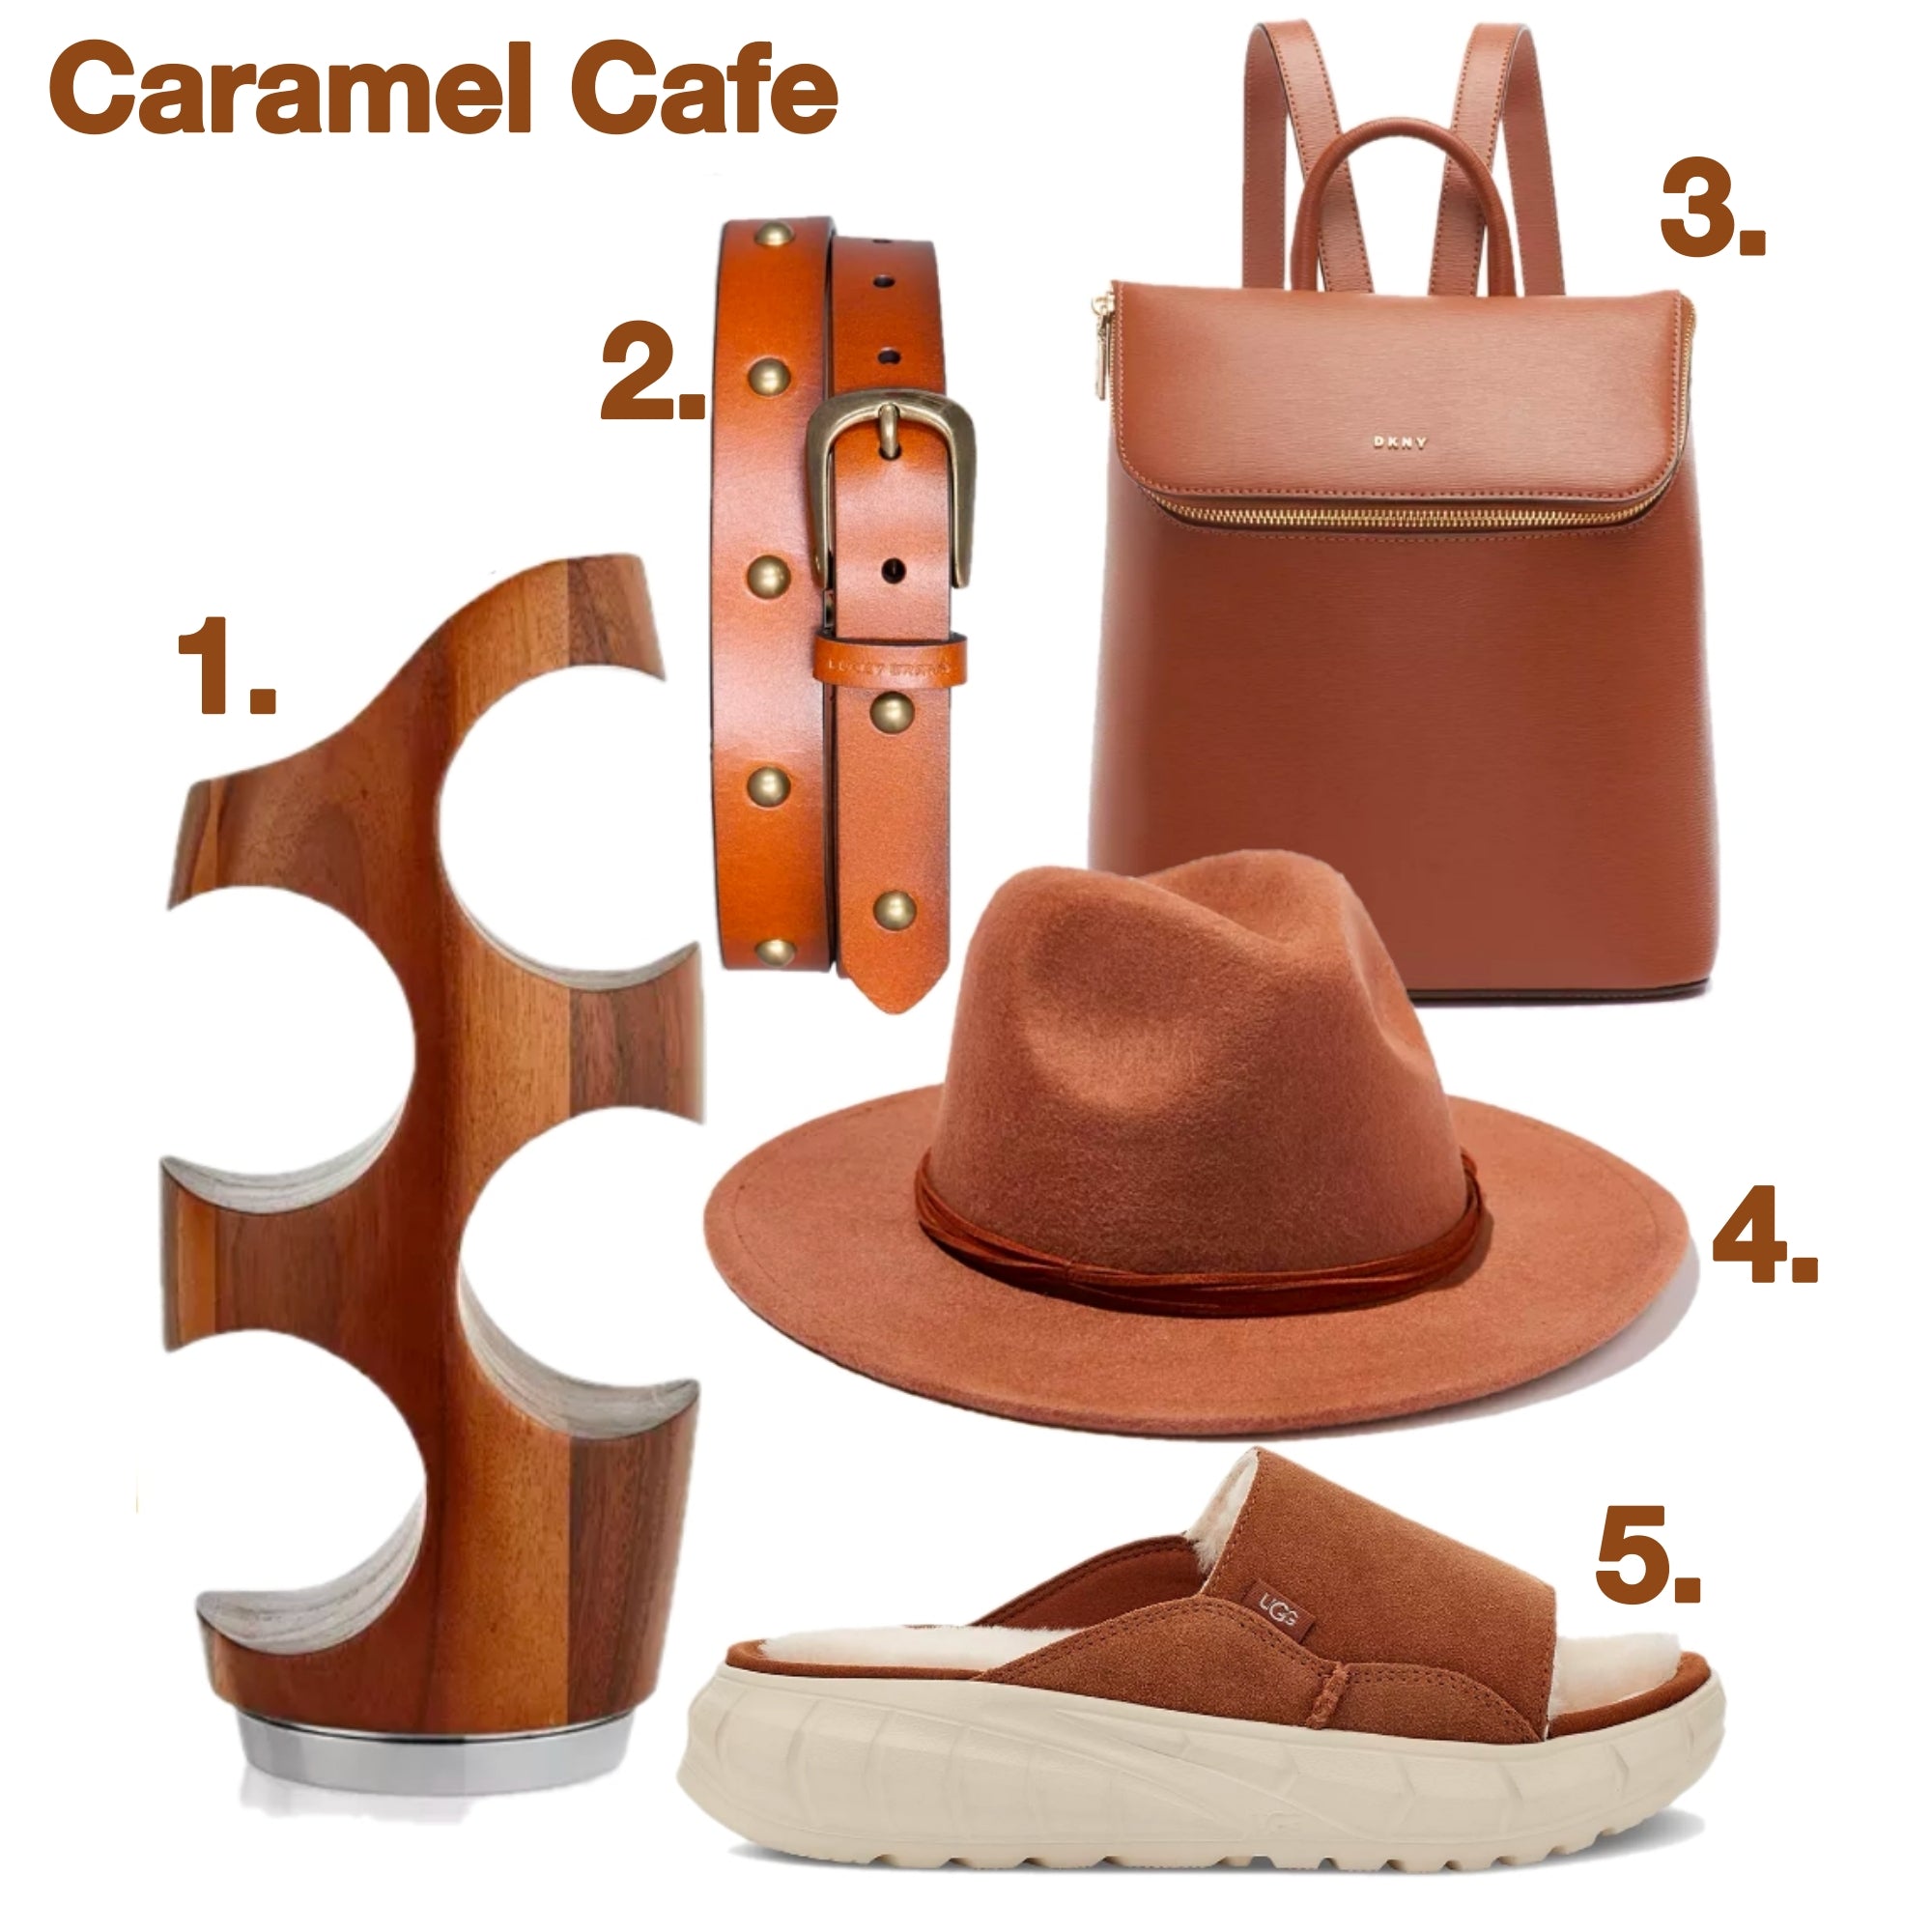 Caramel Cafe Holiday Gift Guide